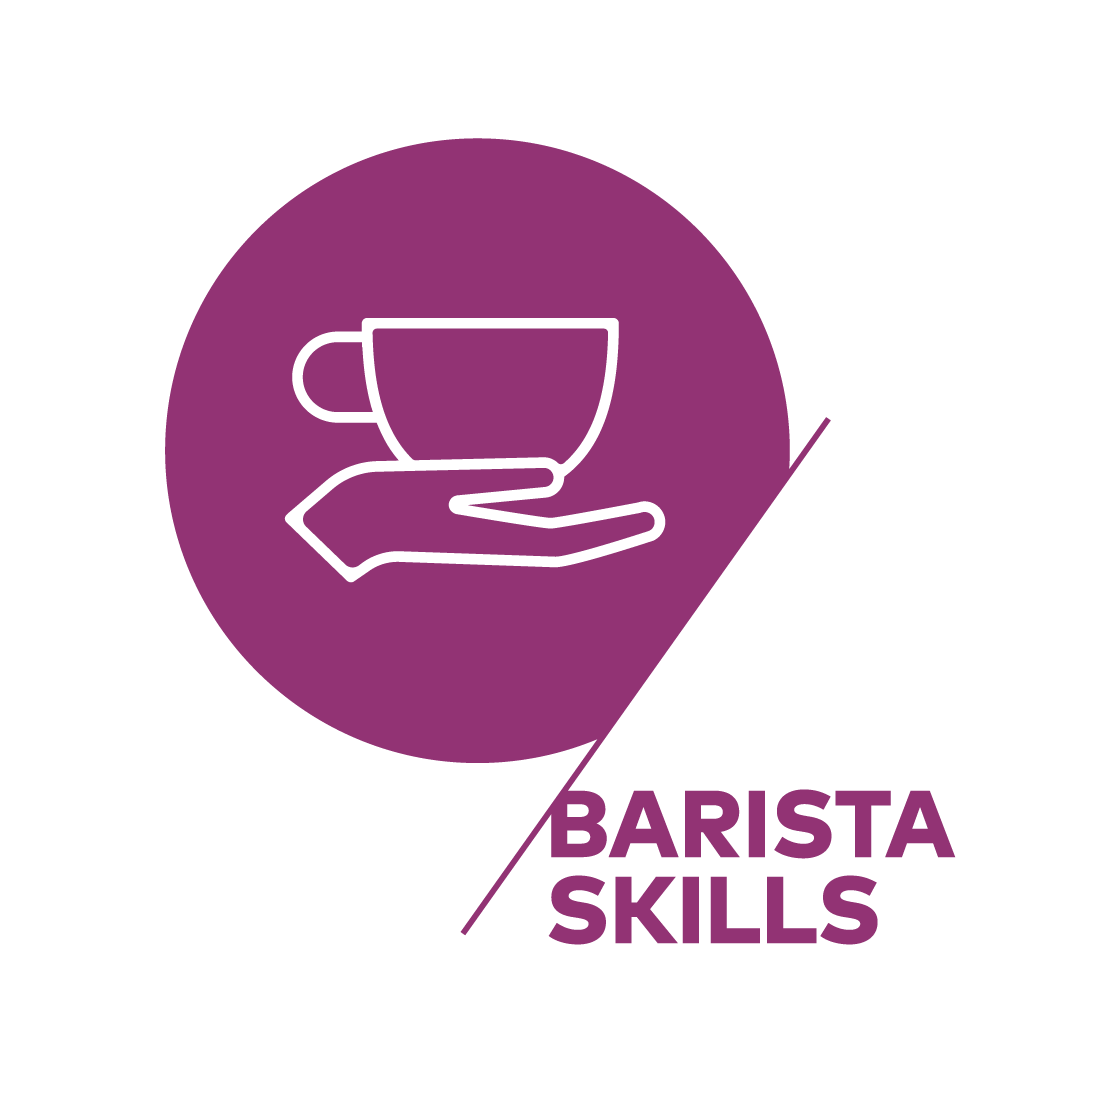 Important Barista Skills That Employers Value